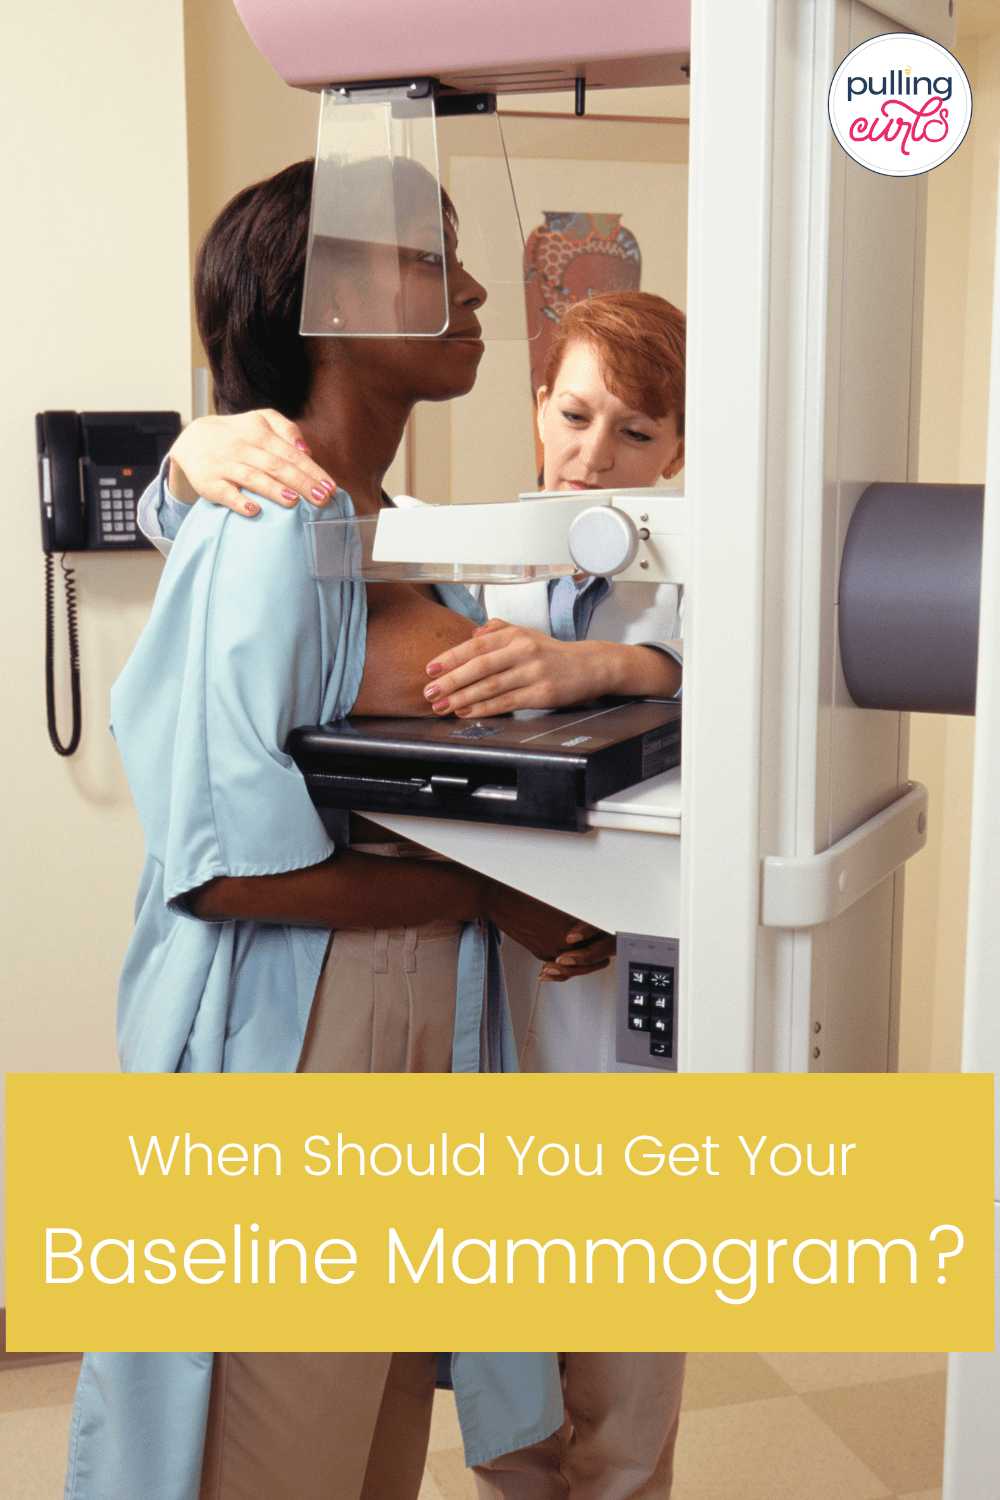 Mammogram tips | getting your | stuff | first | screening | what to expect | call back via @pullingcurls